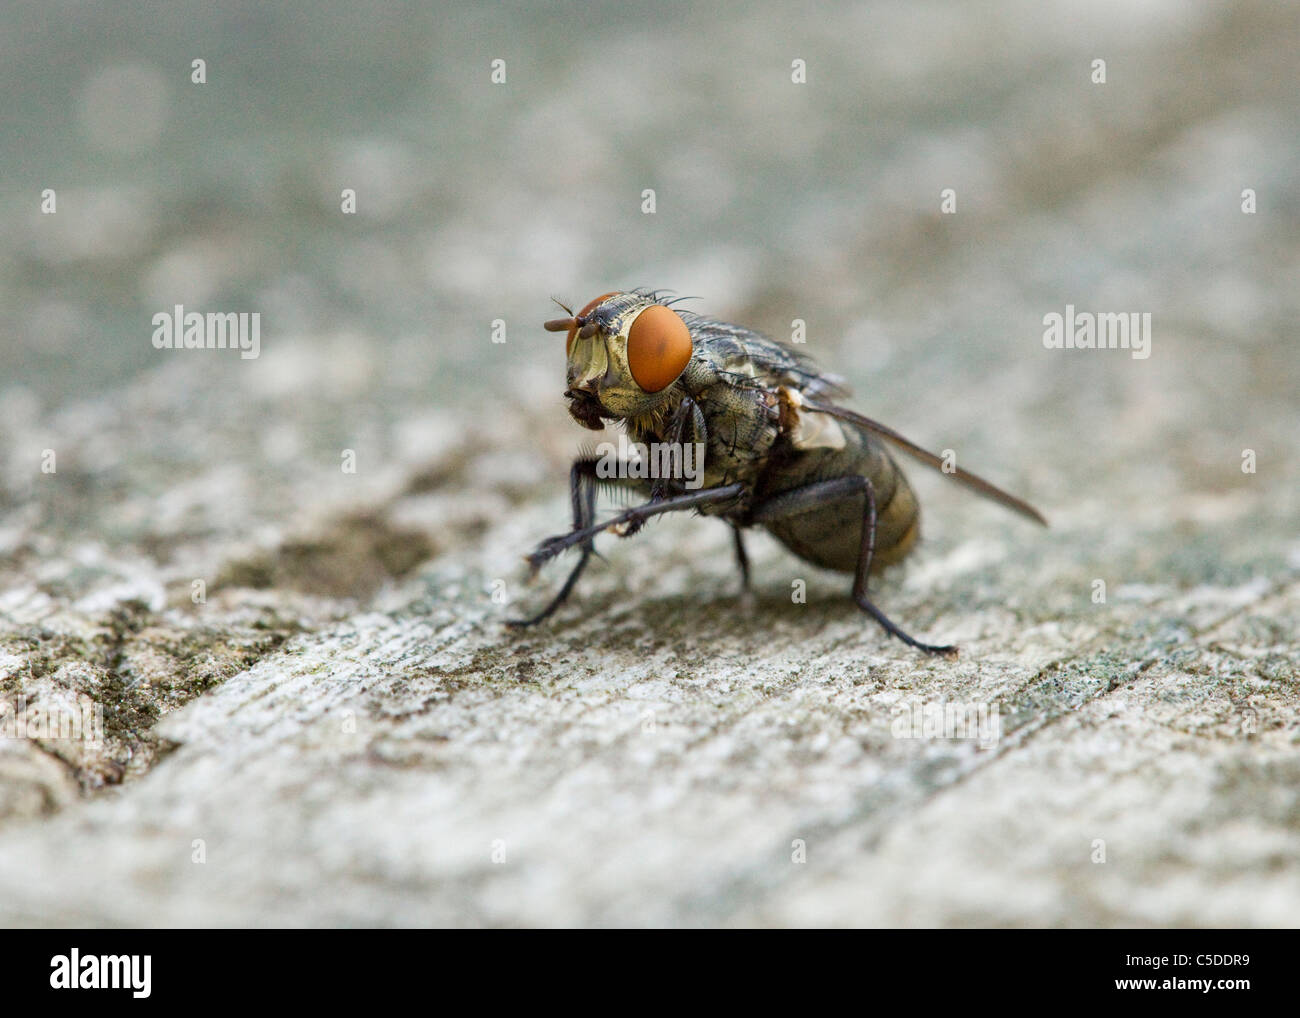 Common housefly (Musca domestica) closeup detail Stock Photo